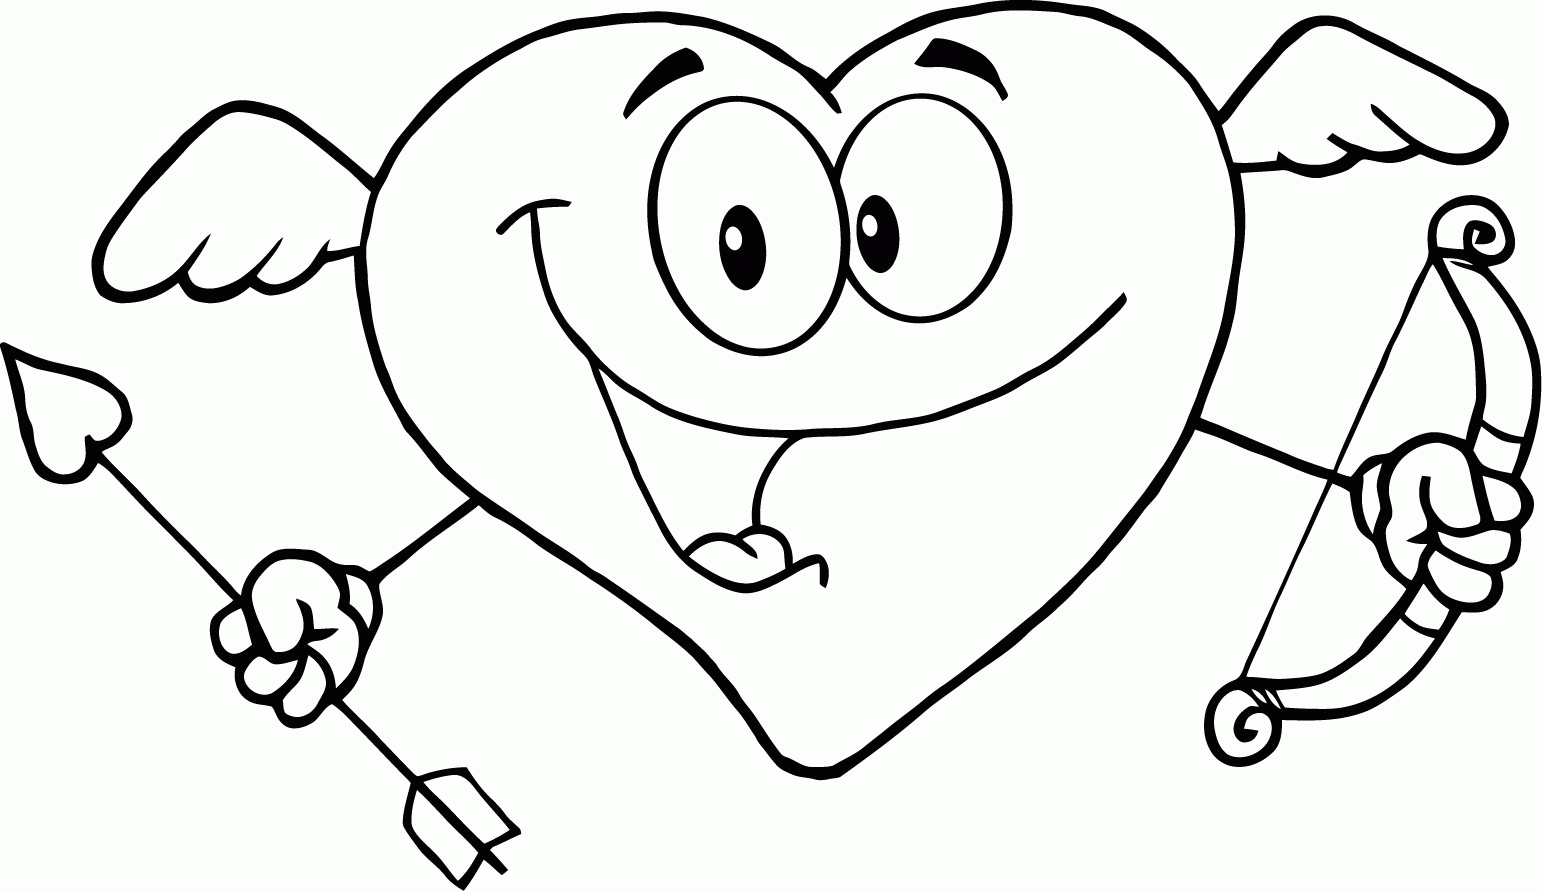 Smiley Face Coloring Pages (18 Pictures) - Colorine.net | 7848